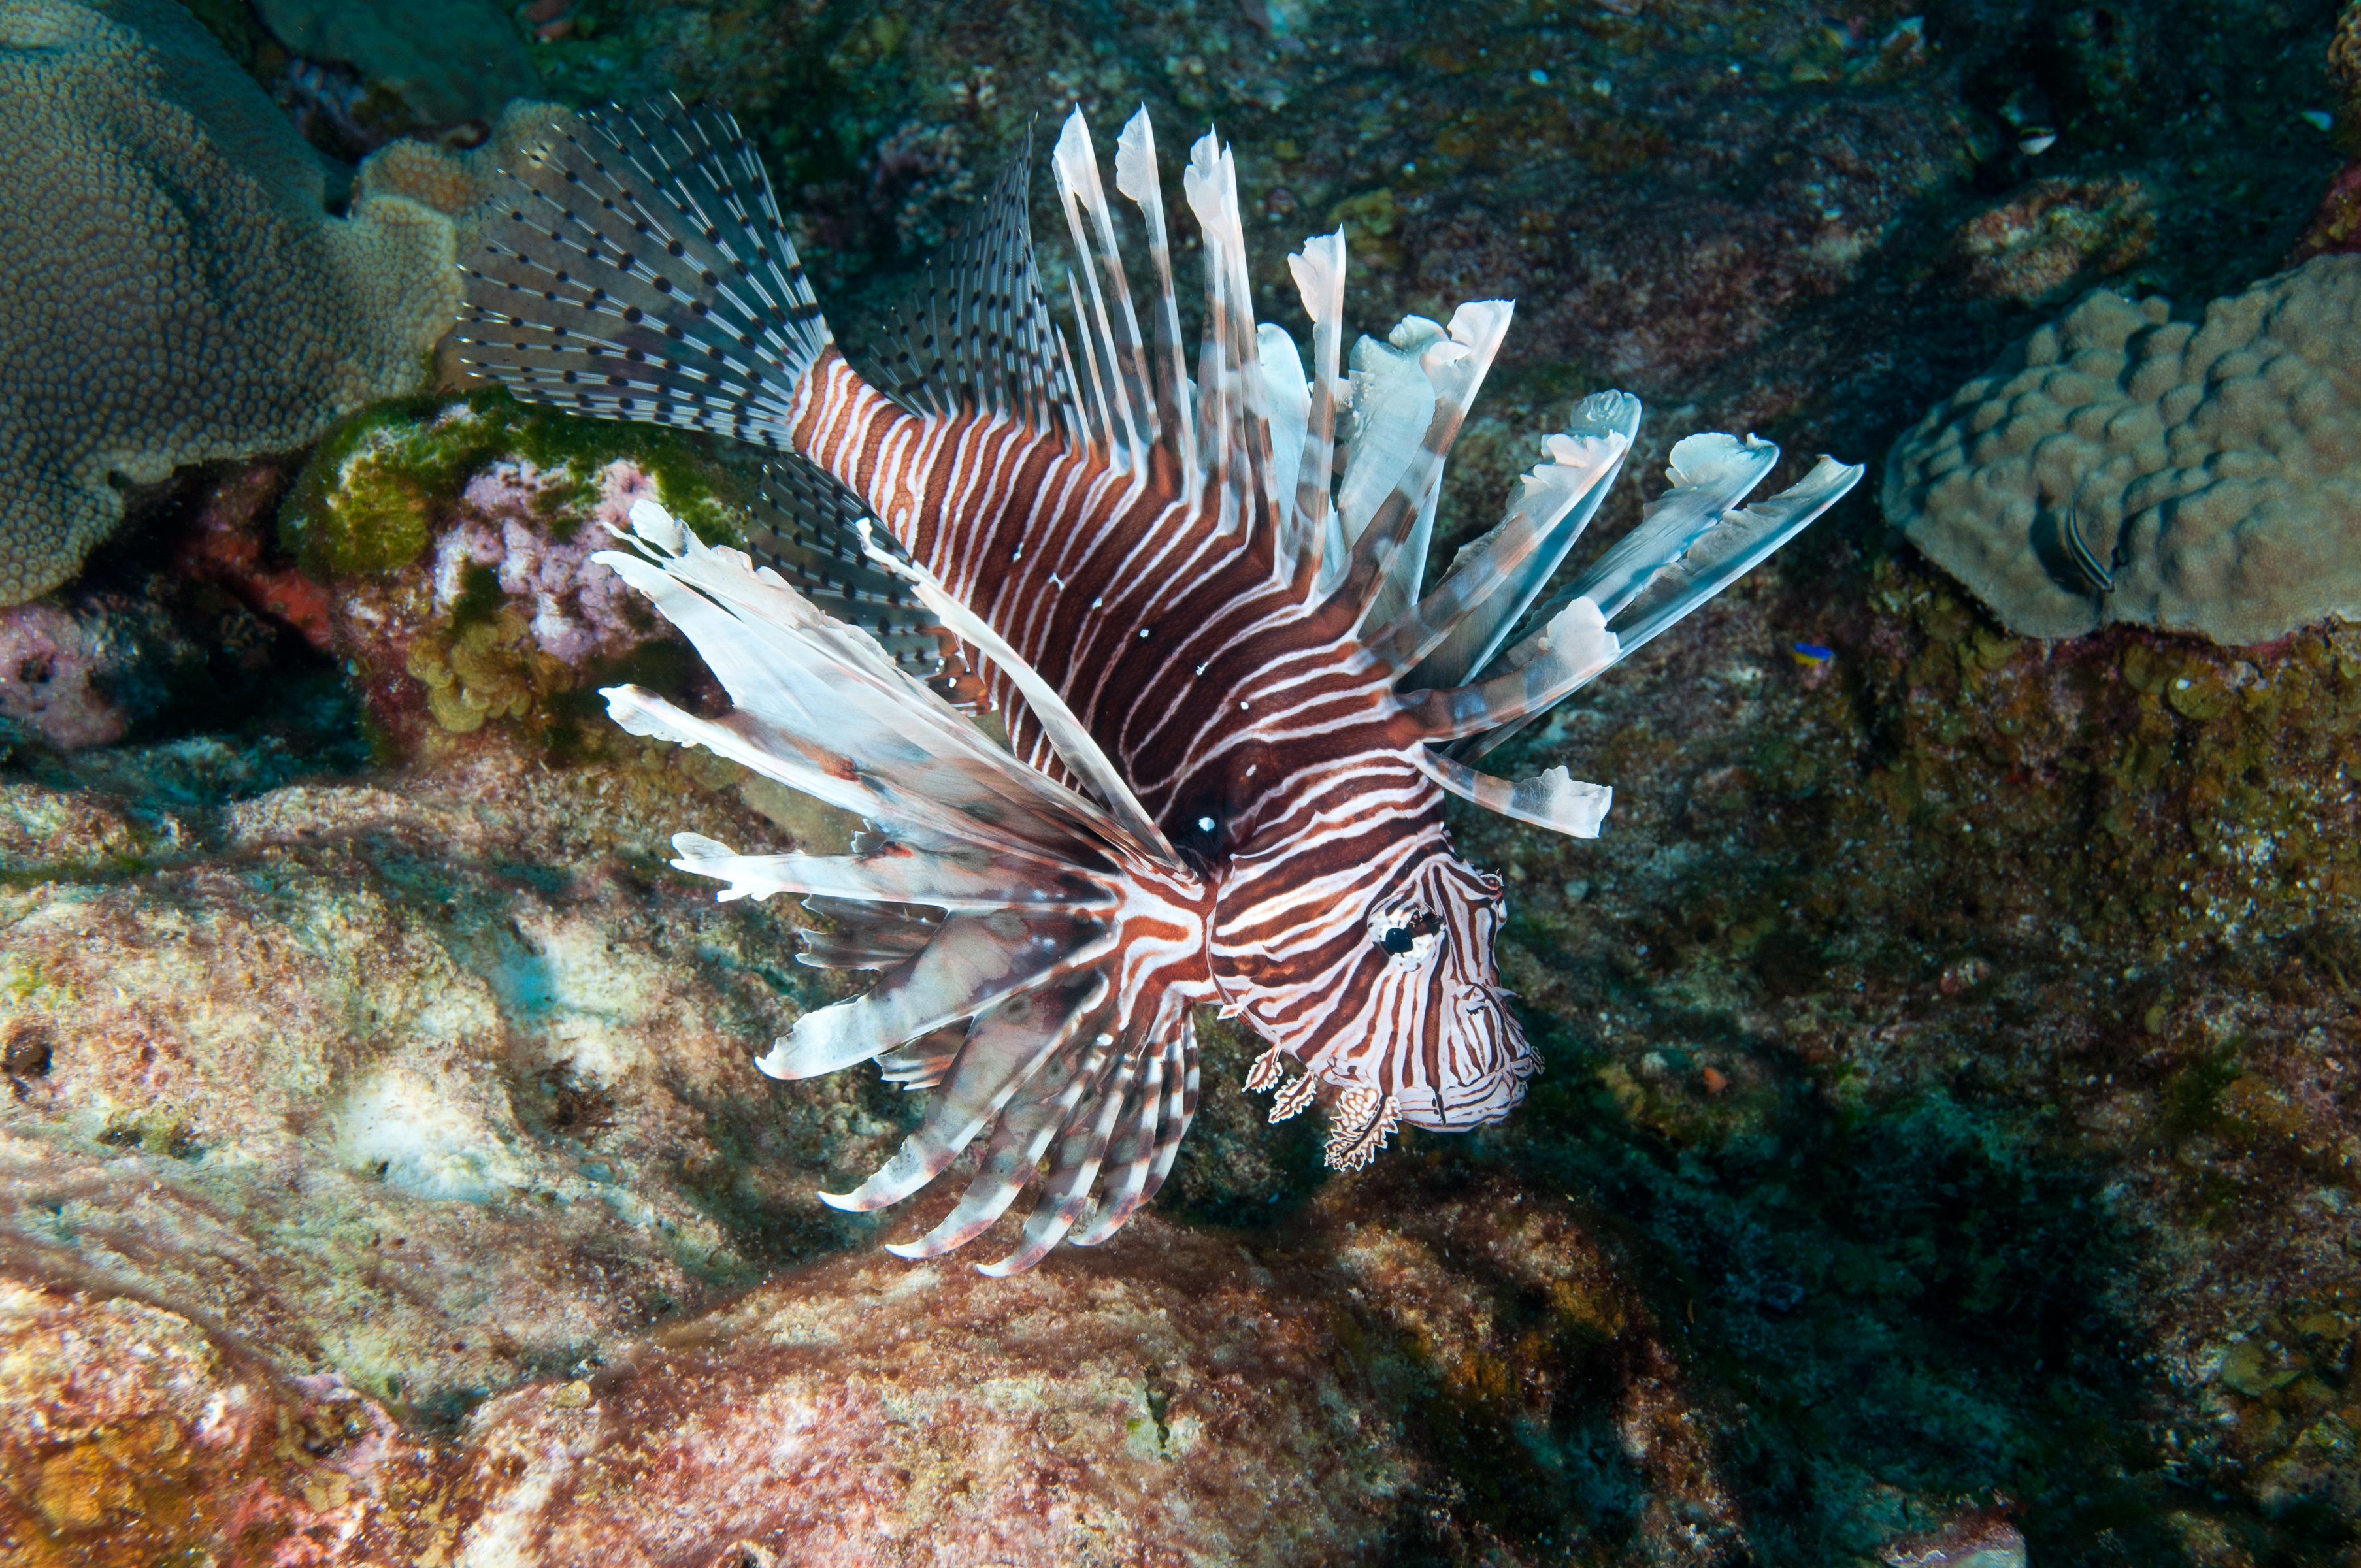 A close-up photo shows a lionfish swimming among a coral reef in the Atlantic Ocean.